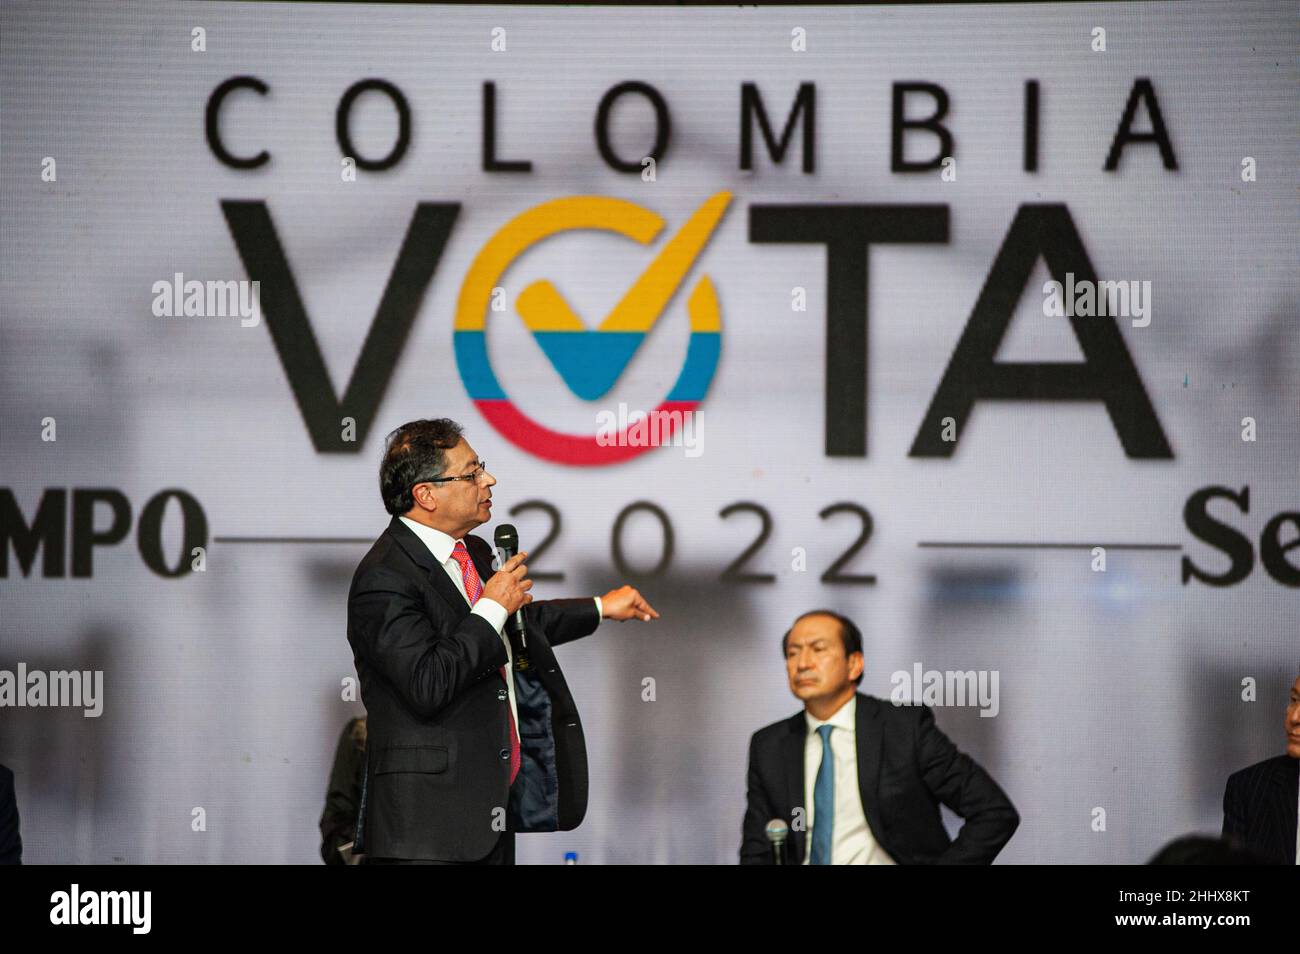 Bogota, Colombia on January 25, 2022. Presidential candidate Gustavo Petro of the political alliance 'Pacto Historico' speaks during the first presidential candidates debate in Bogota, Colombia on January 25, 2022. Credit: Long Visual Press/Alamy Live News Stock Photo